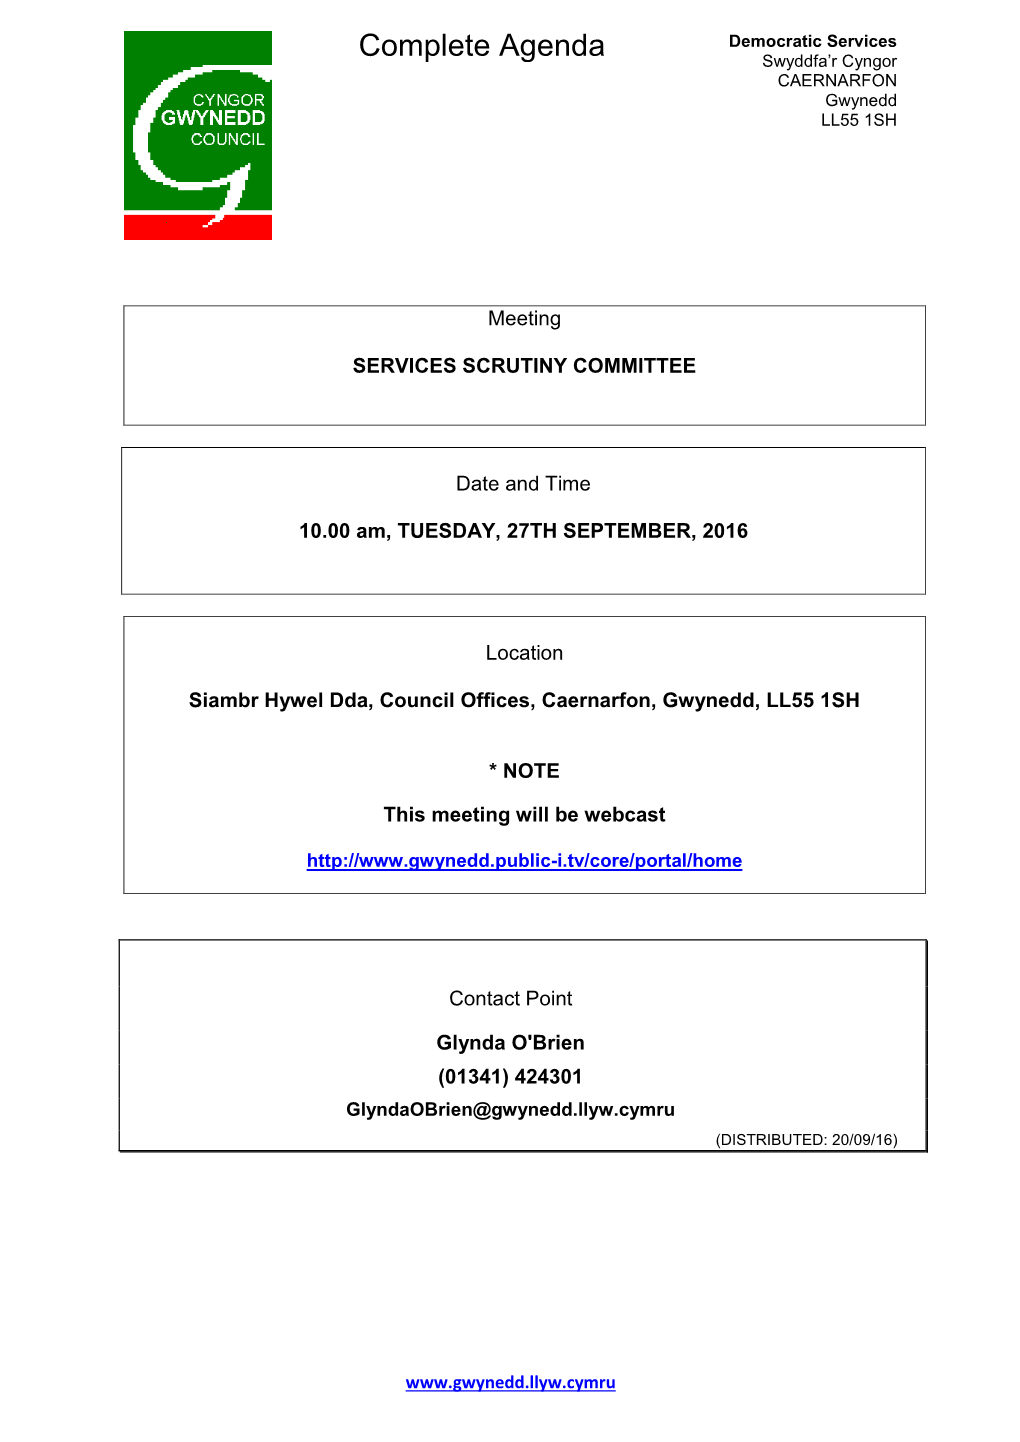 (Public Pack)Agenda Document for Services Scrutiny Committee, 27/09